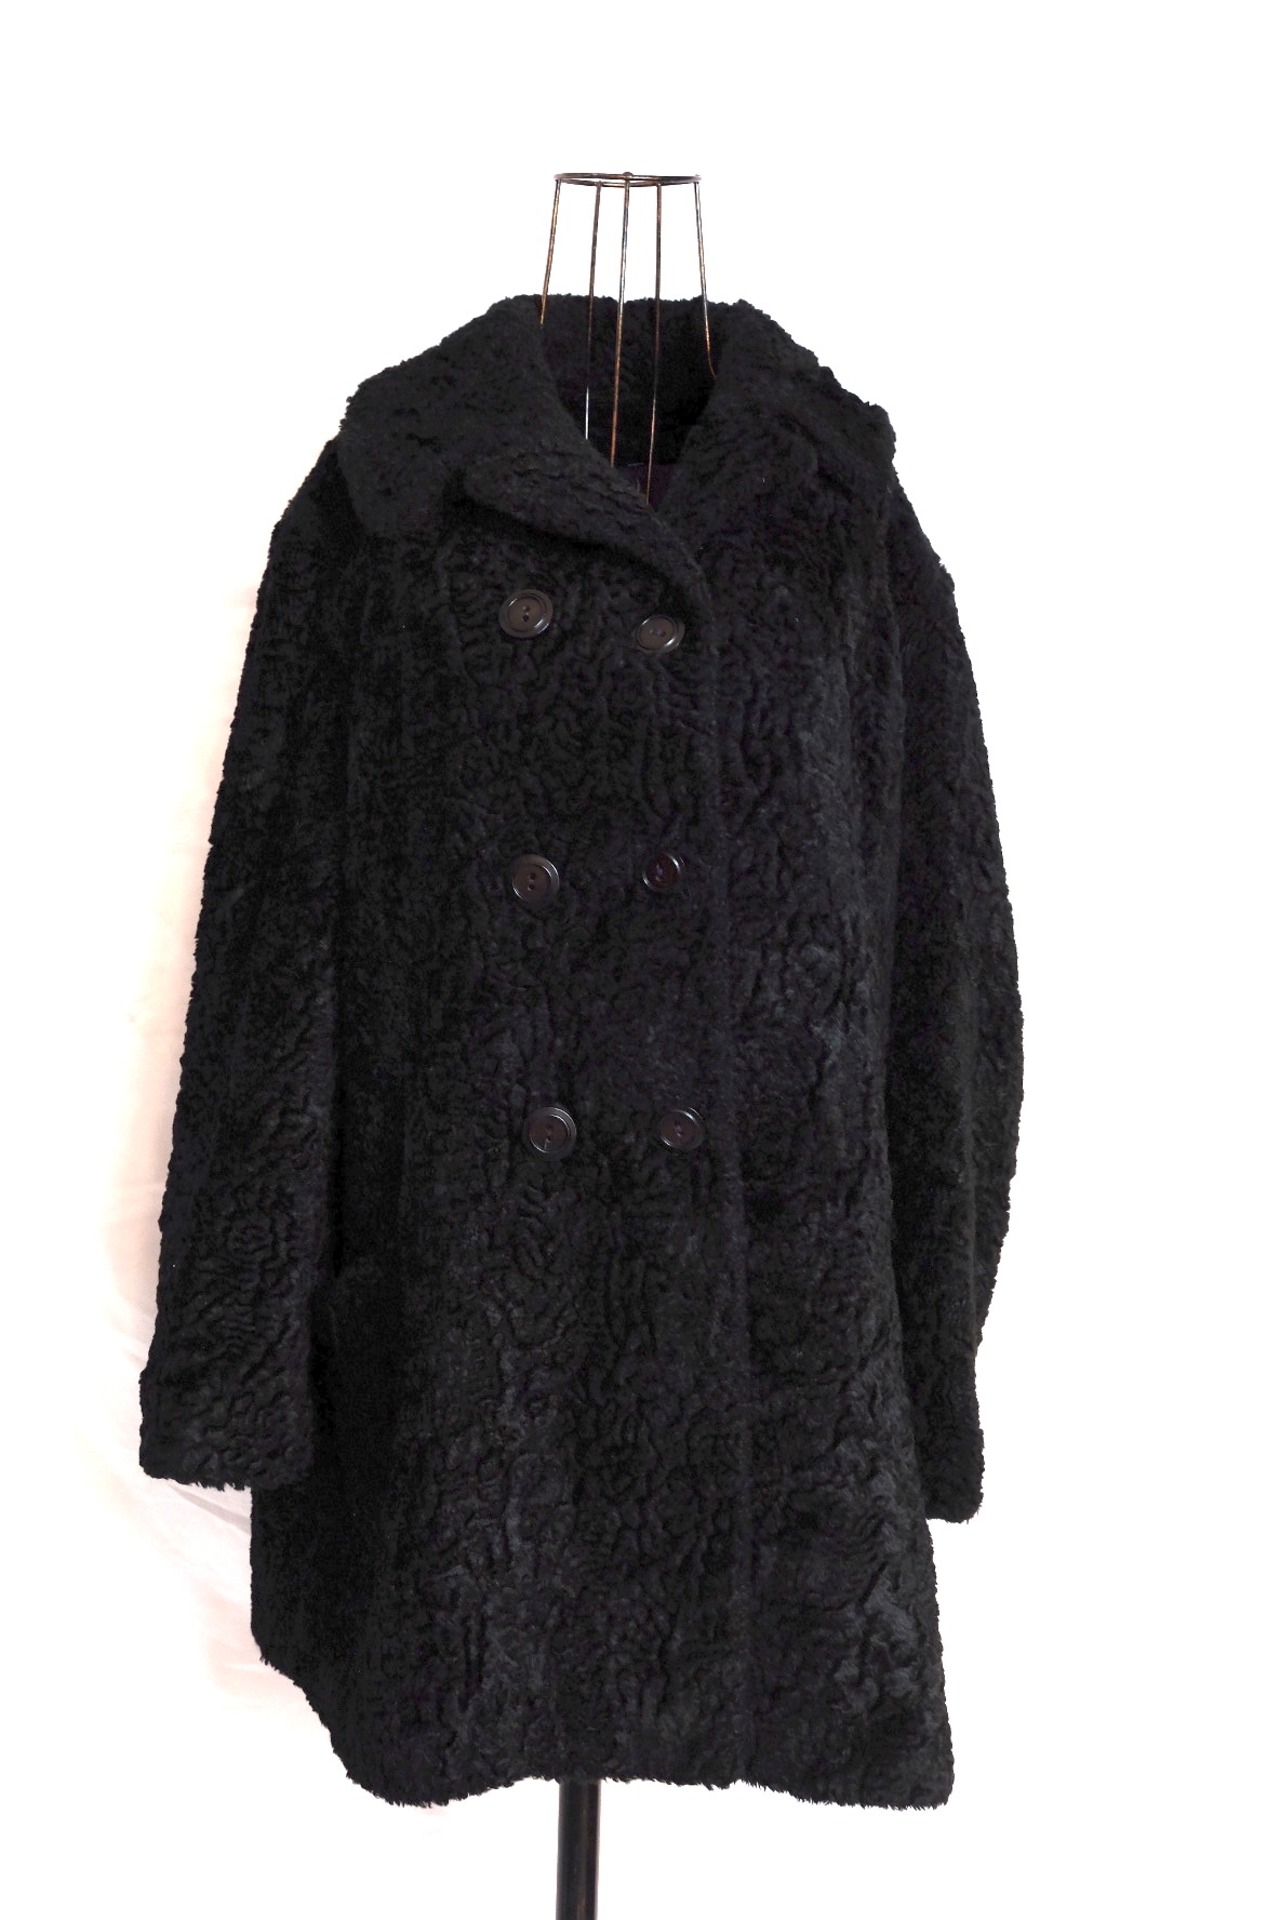 Poodle hair coat Made in Canada